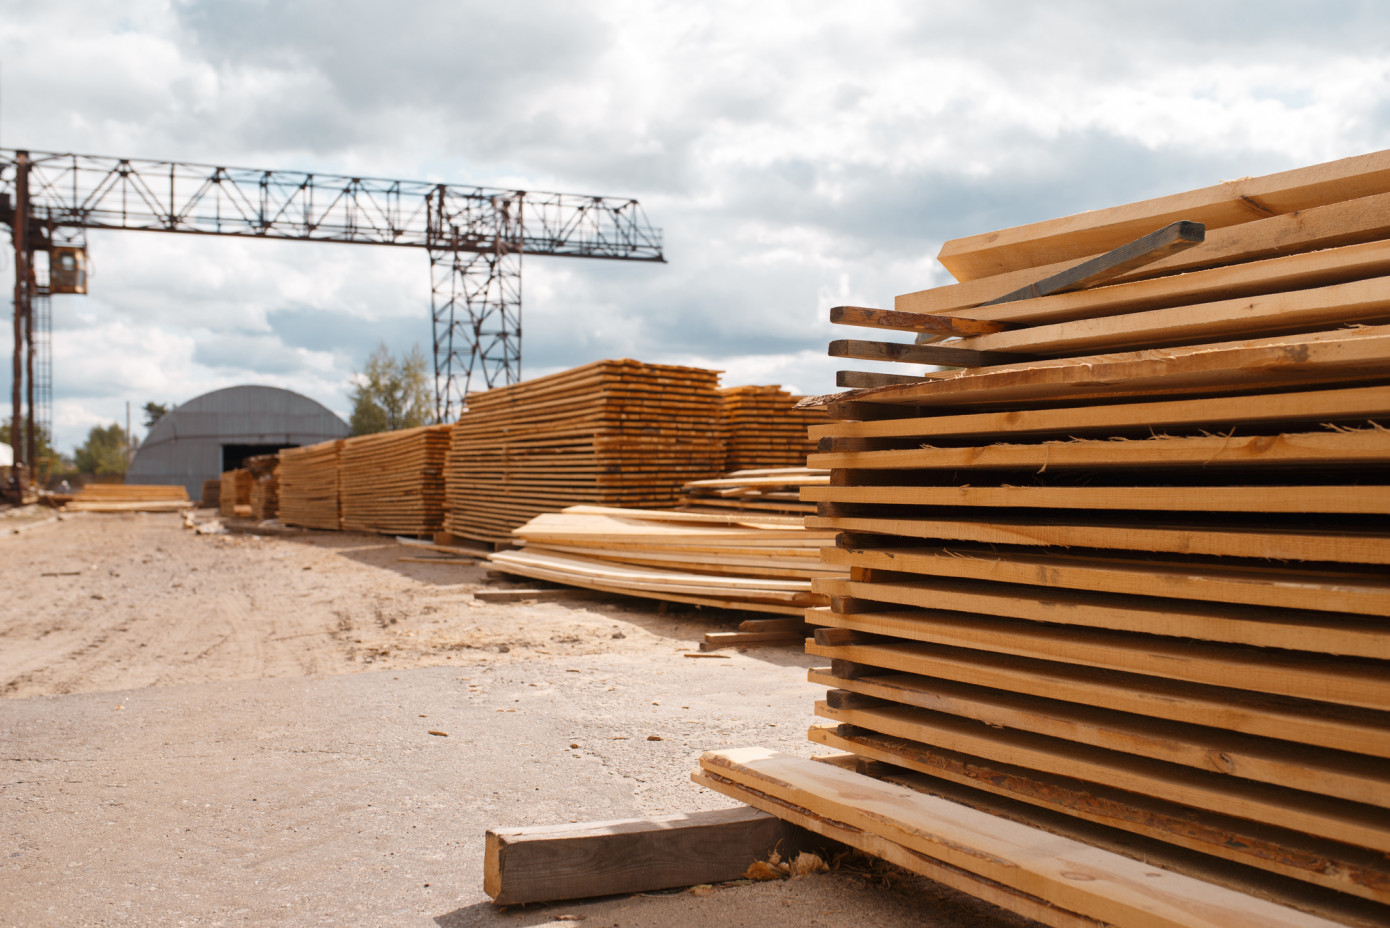 In February, price for lumber exported from Thailand to China up 2%